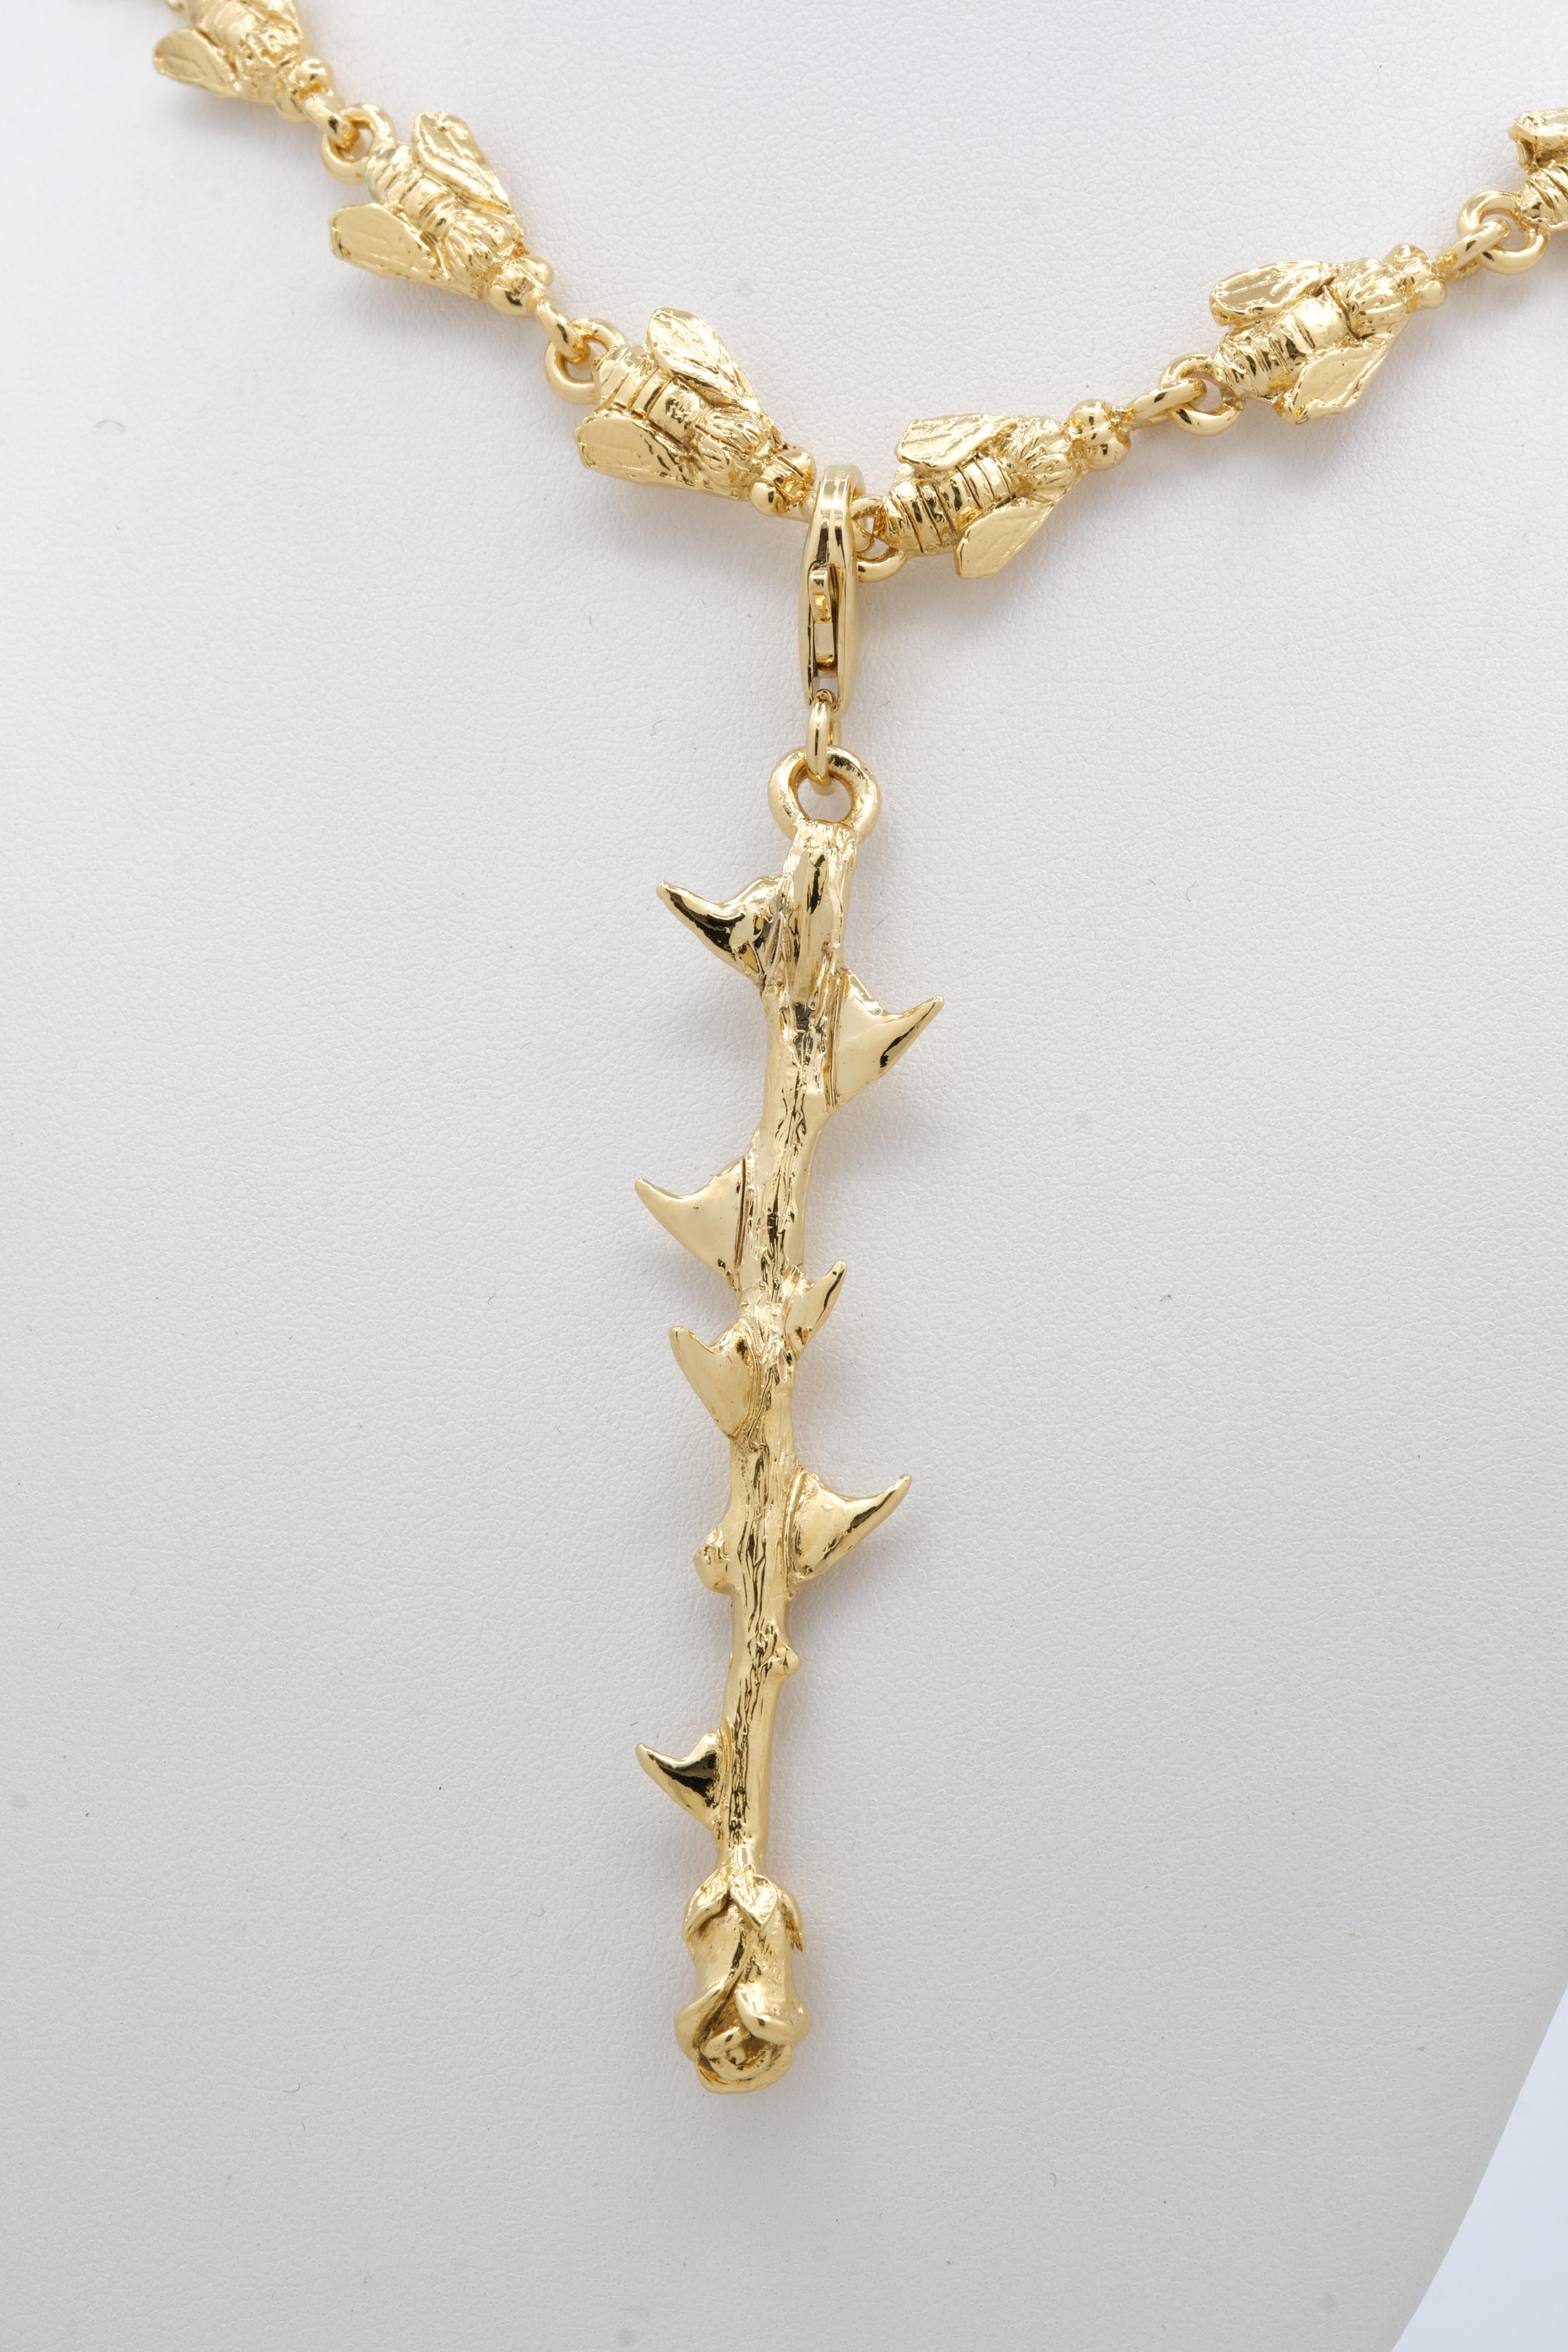 Contemporary Necklace and Pendant in 14 Kt Gold  Devotion of 